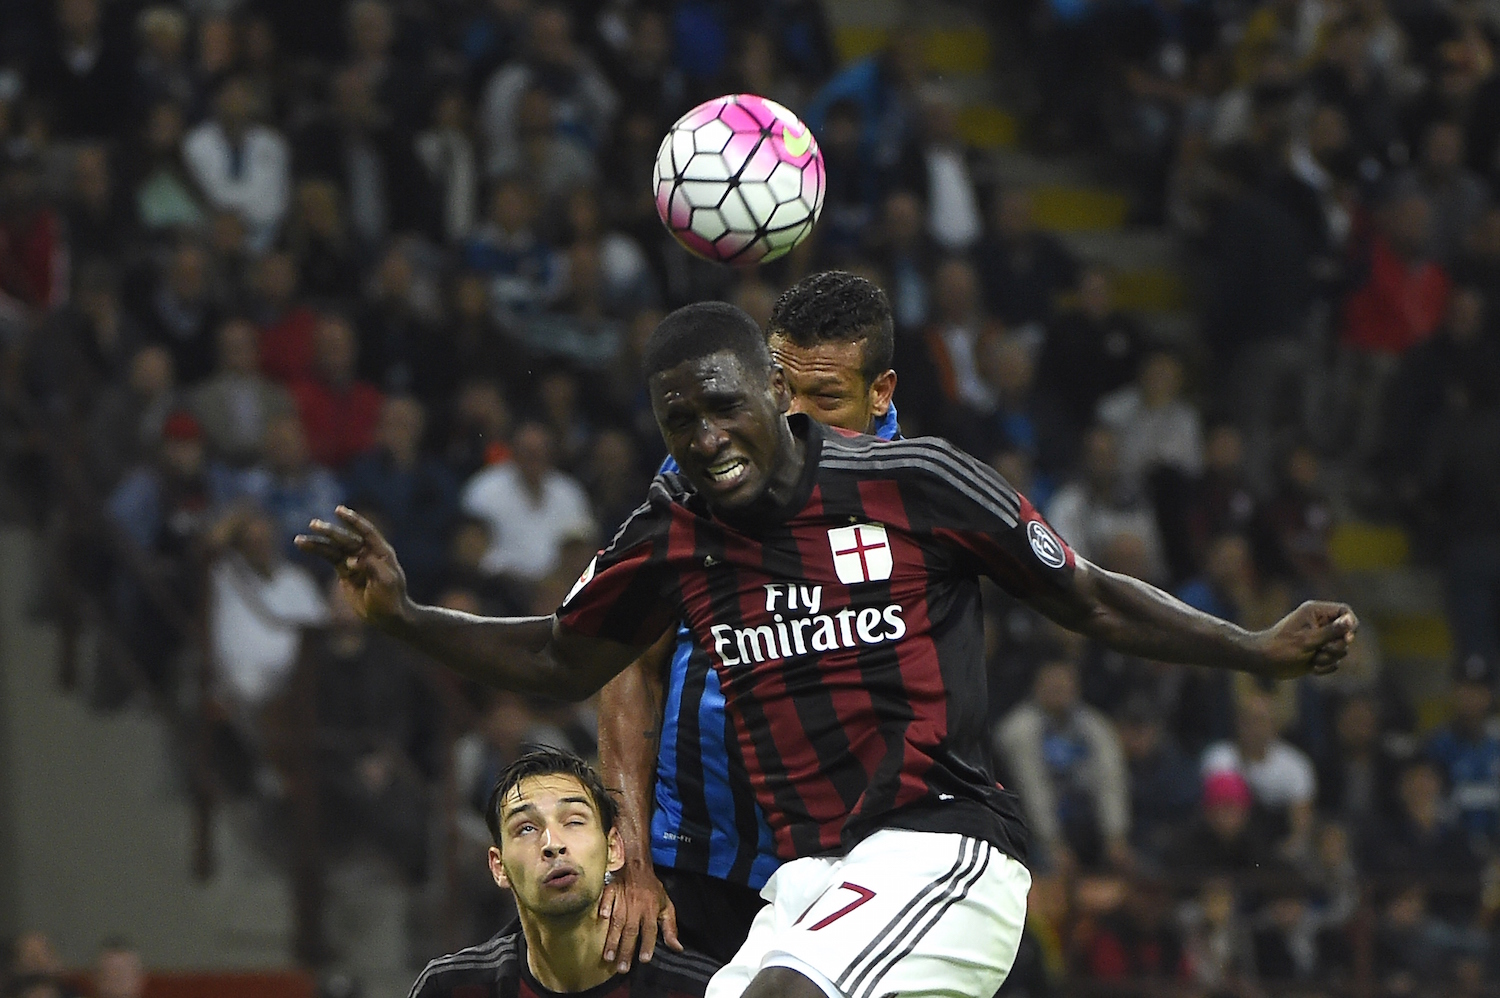 Cristian Zapata competes with Fedy Guarin in the air. | OLIVIER MORIN/AFP/Getty Images